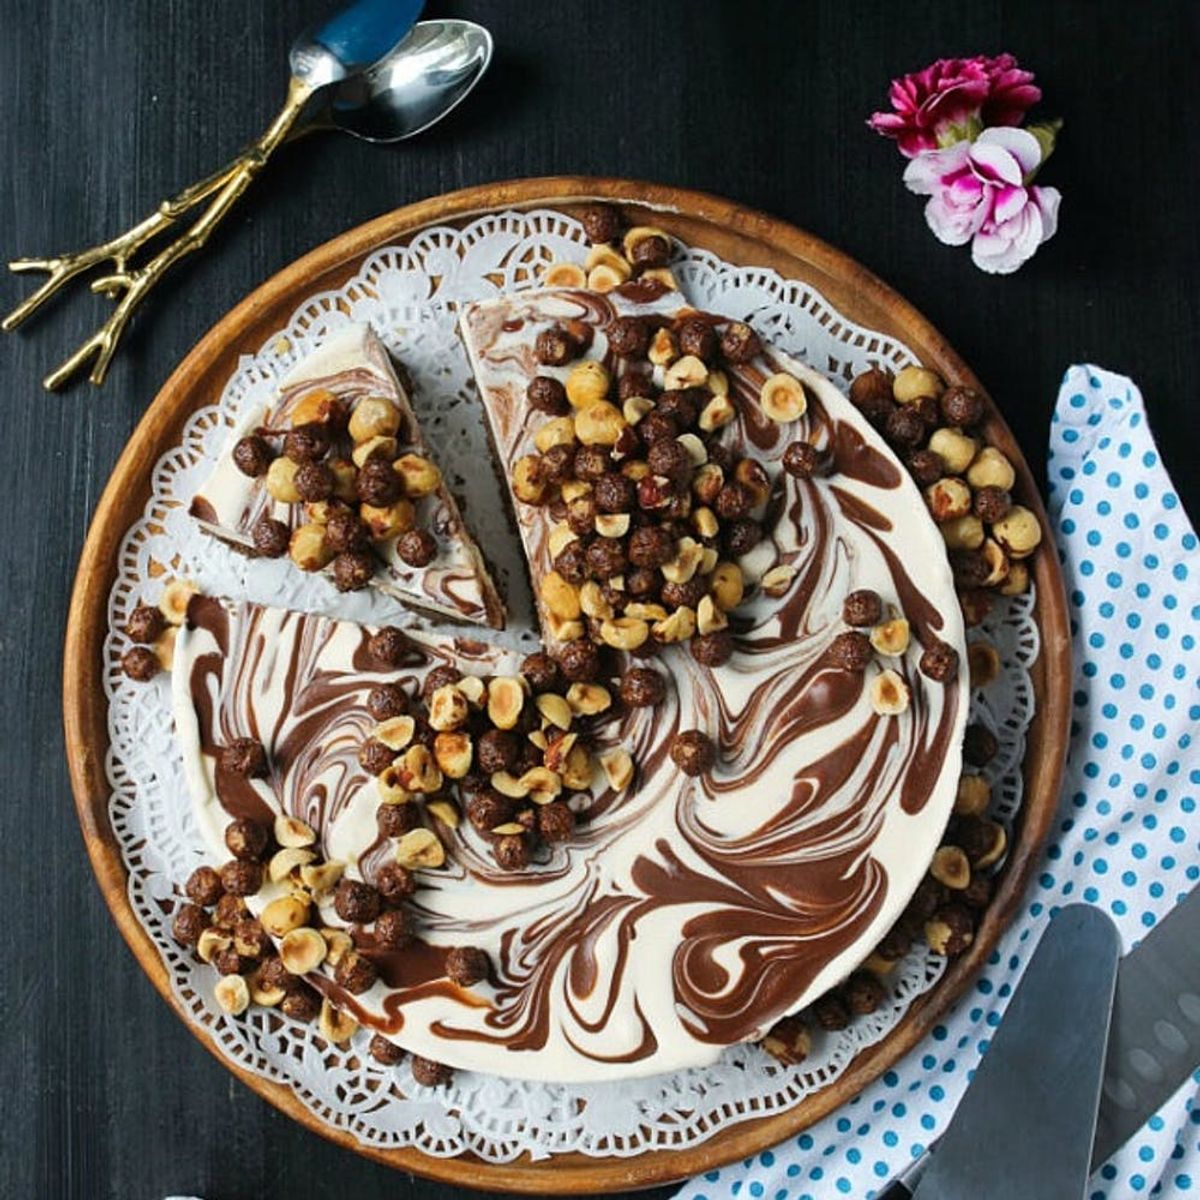 11 Ice Cream Cakes You’ll Scream for This Summer